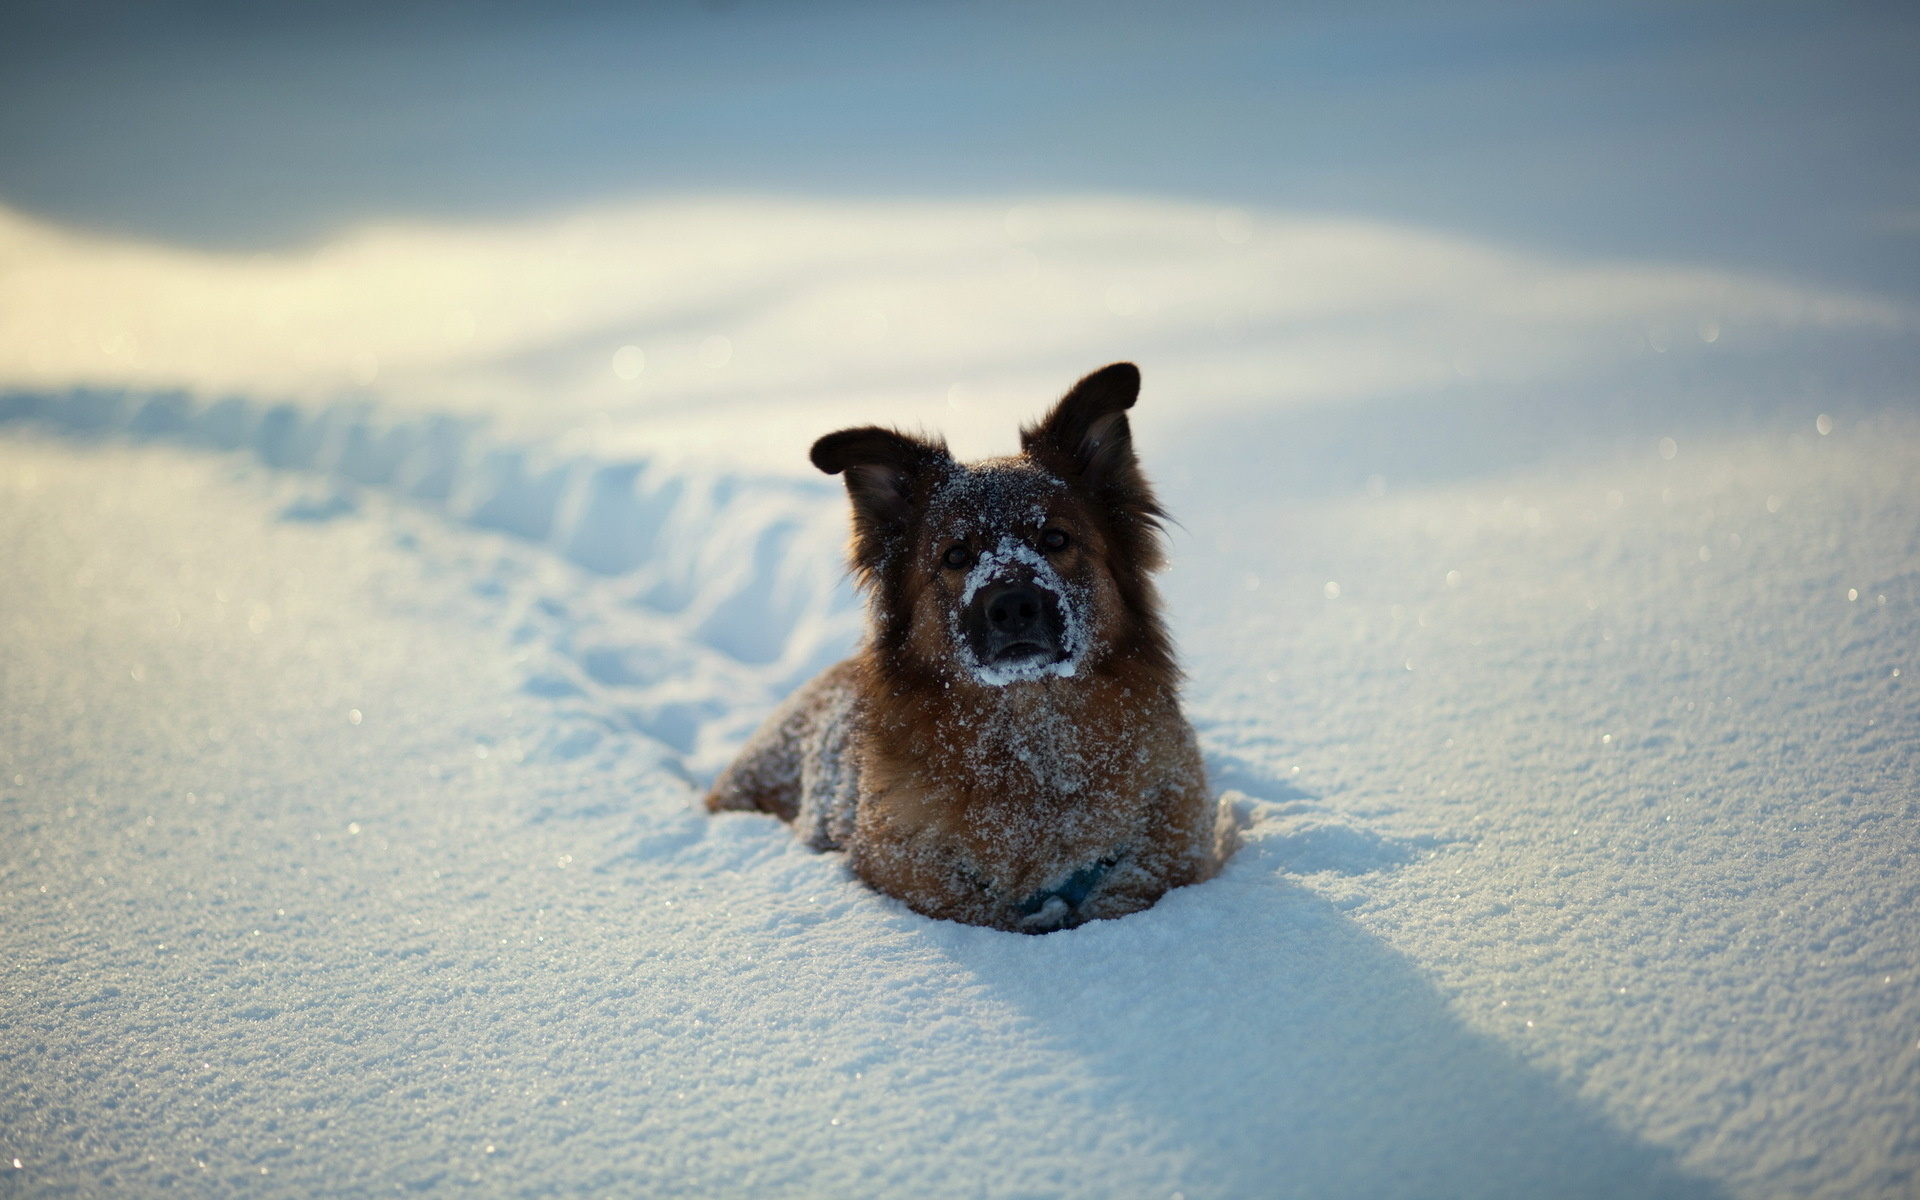 animals, Dogs, Canines, Humor, Funny, Cute, Fur, Face, Eyes, Tracks, Foot, Prints, Trail, Path, Winter, Snow, Seasons, White, Sunlight, Sparkle Wallpaper